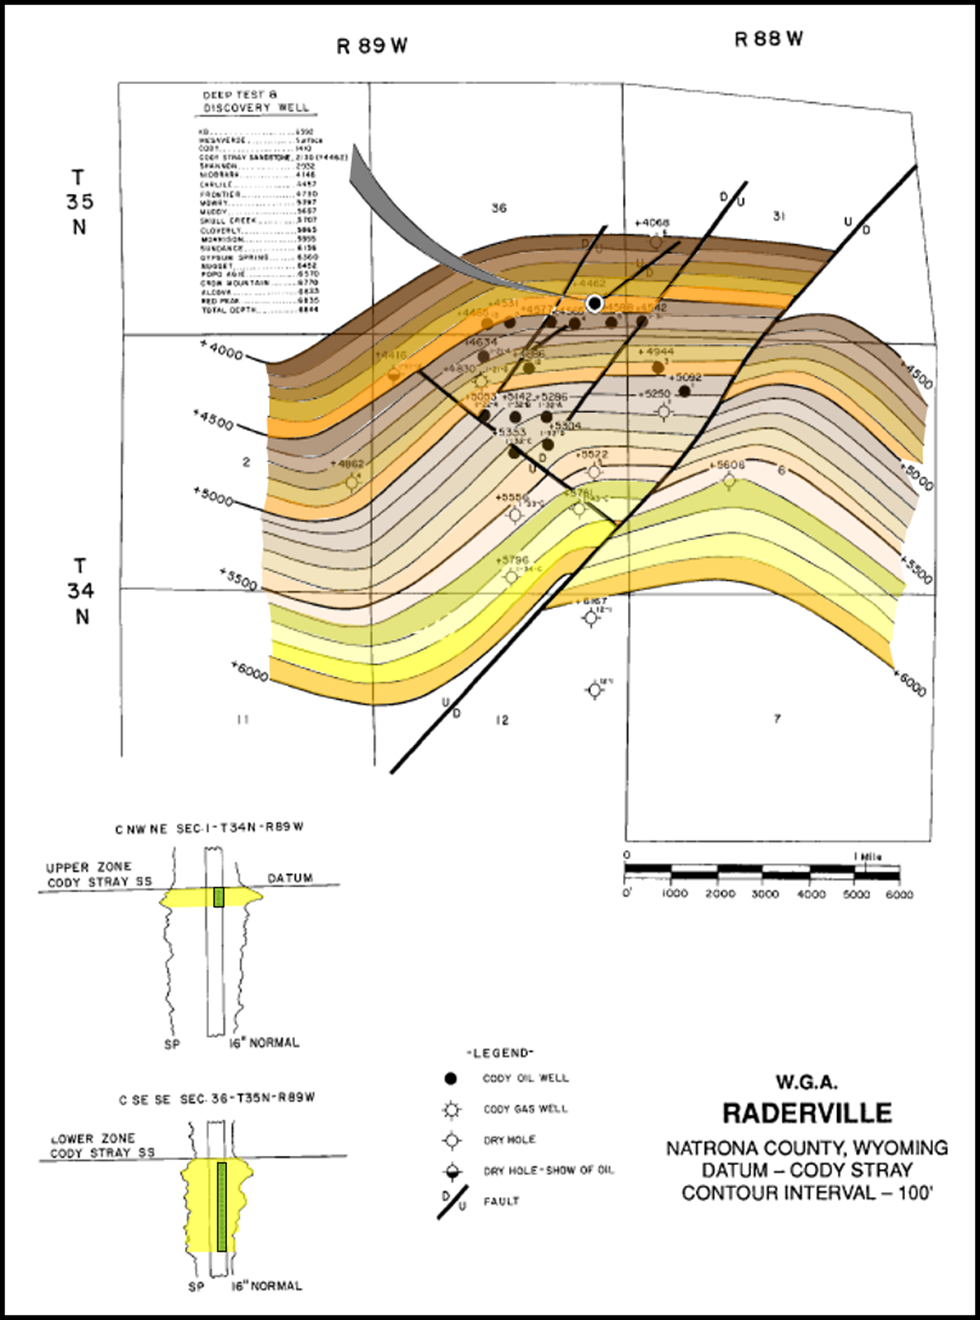 Structural geology map of Cody Stray Sandstone at Raderville Oil Field, Natrona County, Wyoming